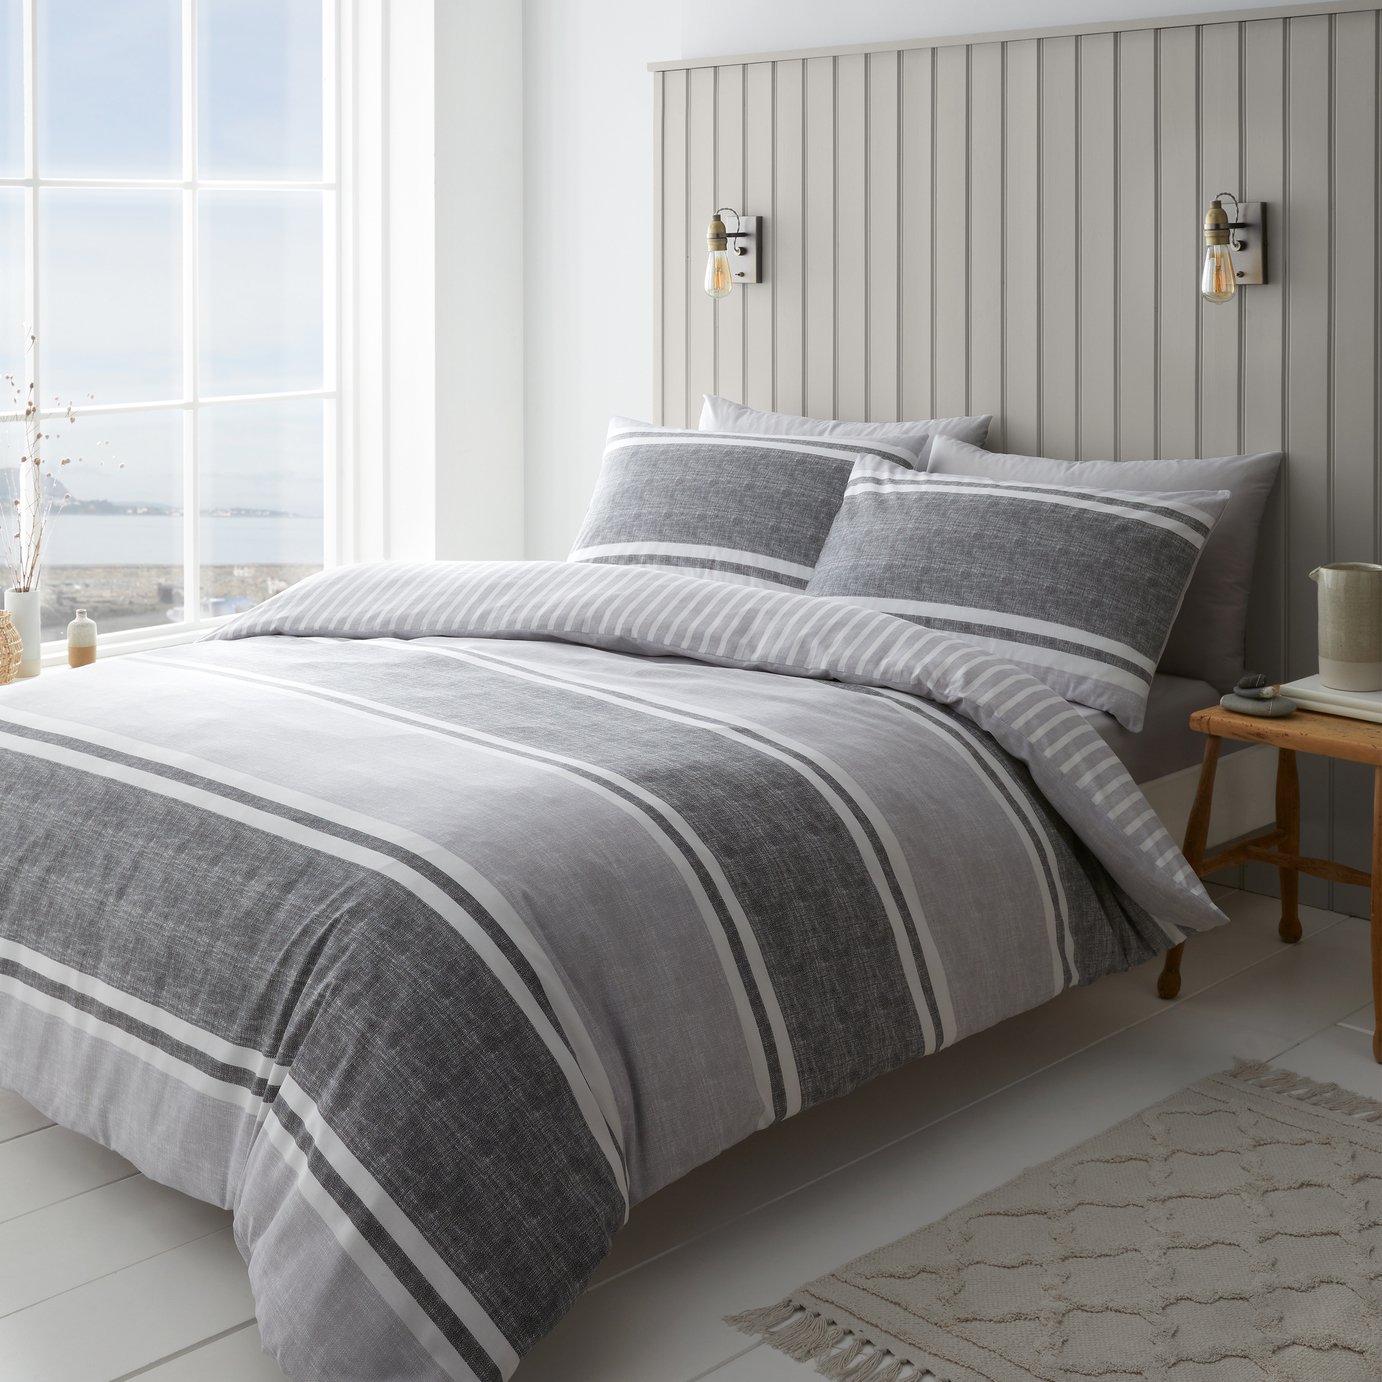 Catherine Lansfield Textured Bands Grey Bedding Set - Double